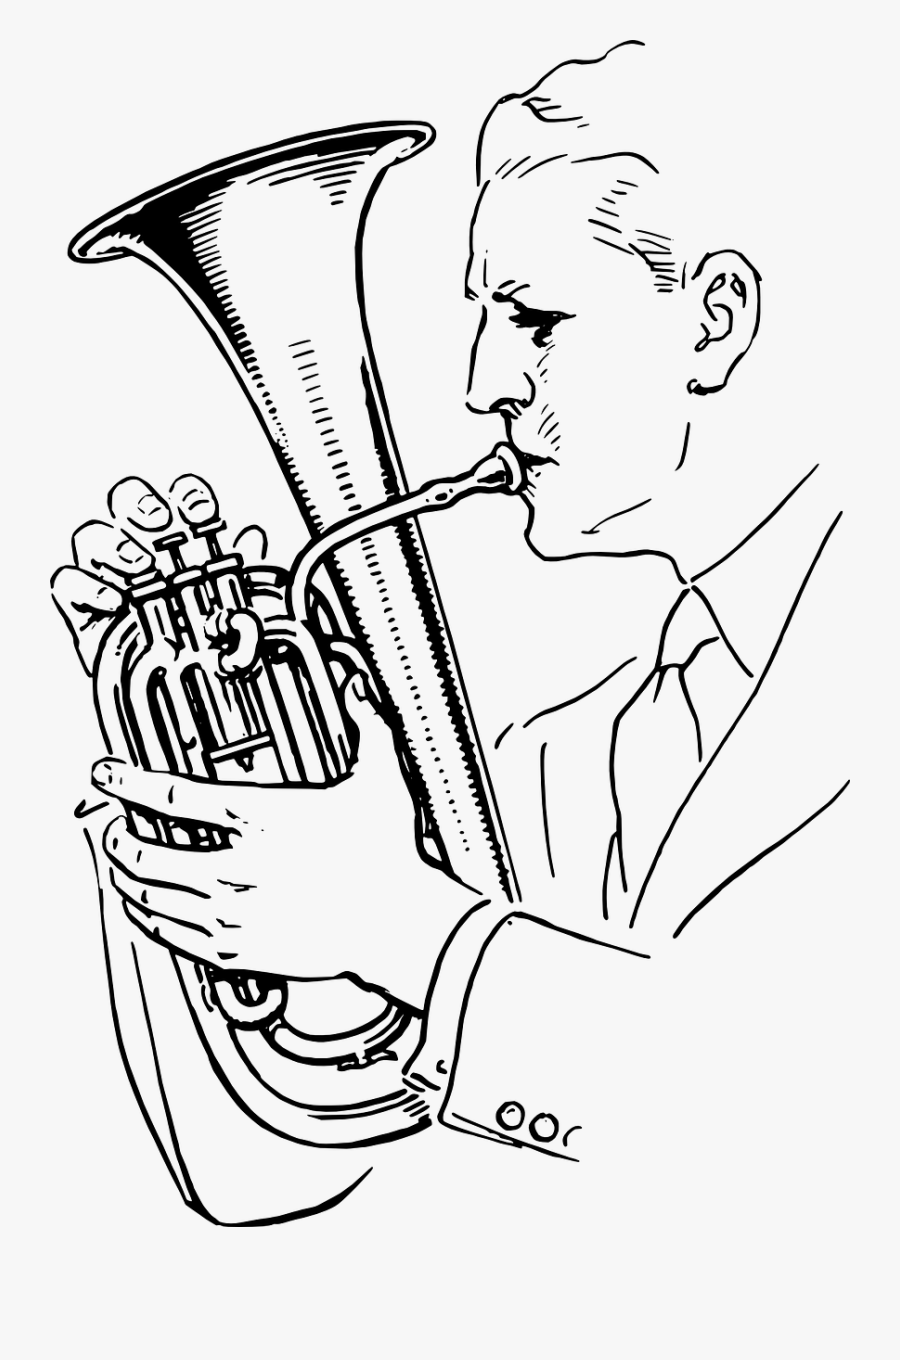 Man Playing Alto Horn - Playing Tuba Clipart Black And White, Transparent Clipart